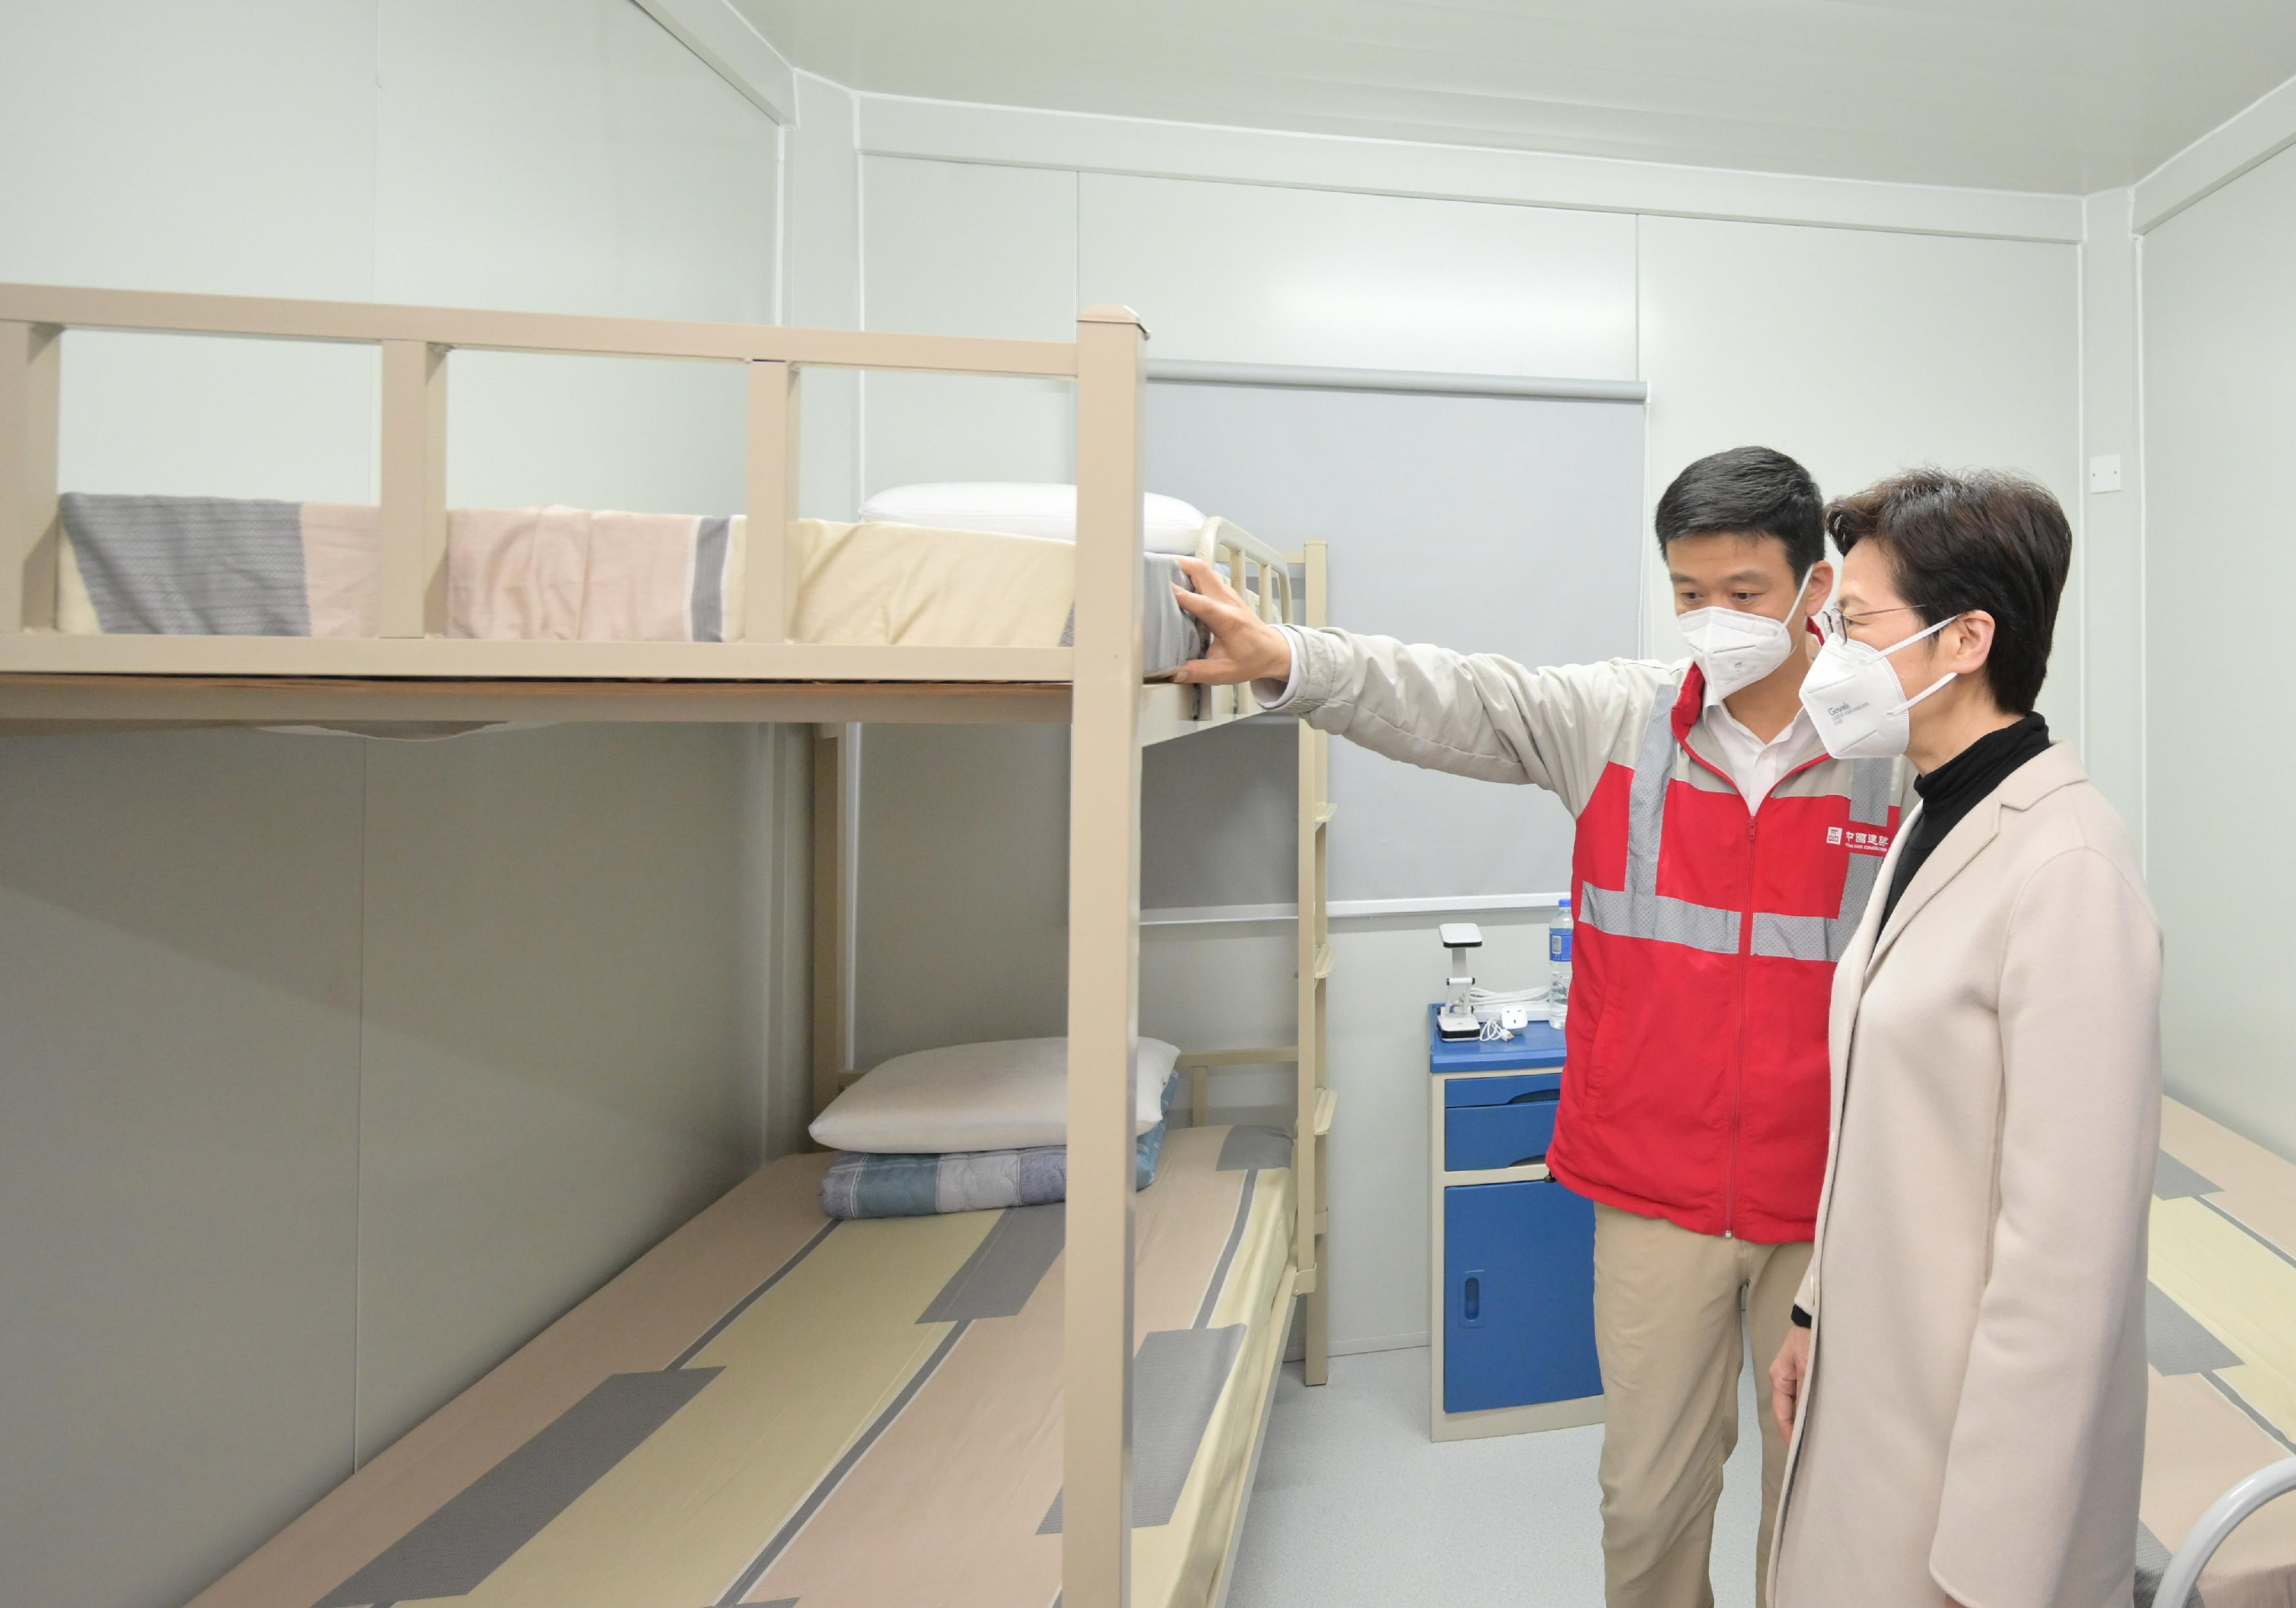 The Chief Executive, Mrs Carrie Lam, this afternoon (March 24) visited the sixth community isolation facility constructed with Mainland support in Yuen Long. Photo shows Mrs Lam (right), accompanied by a representative of the contractor, touring a newly constructed unit.